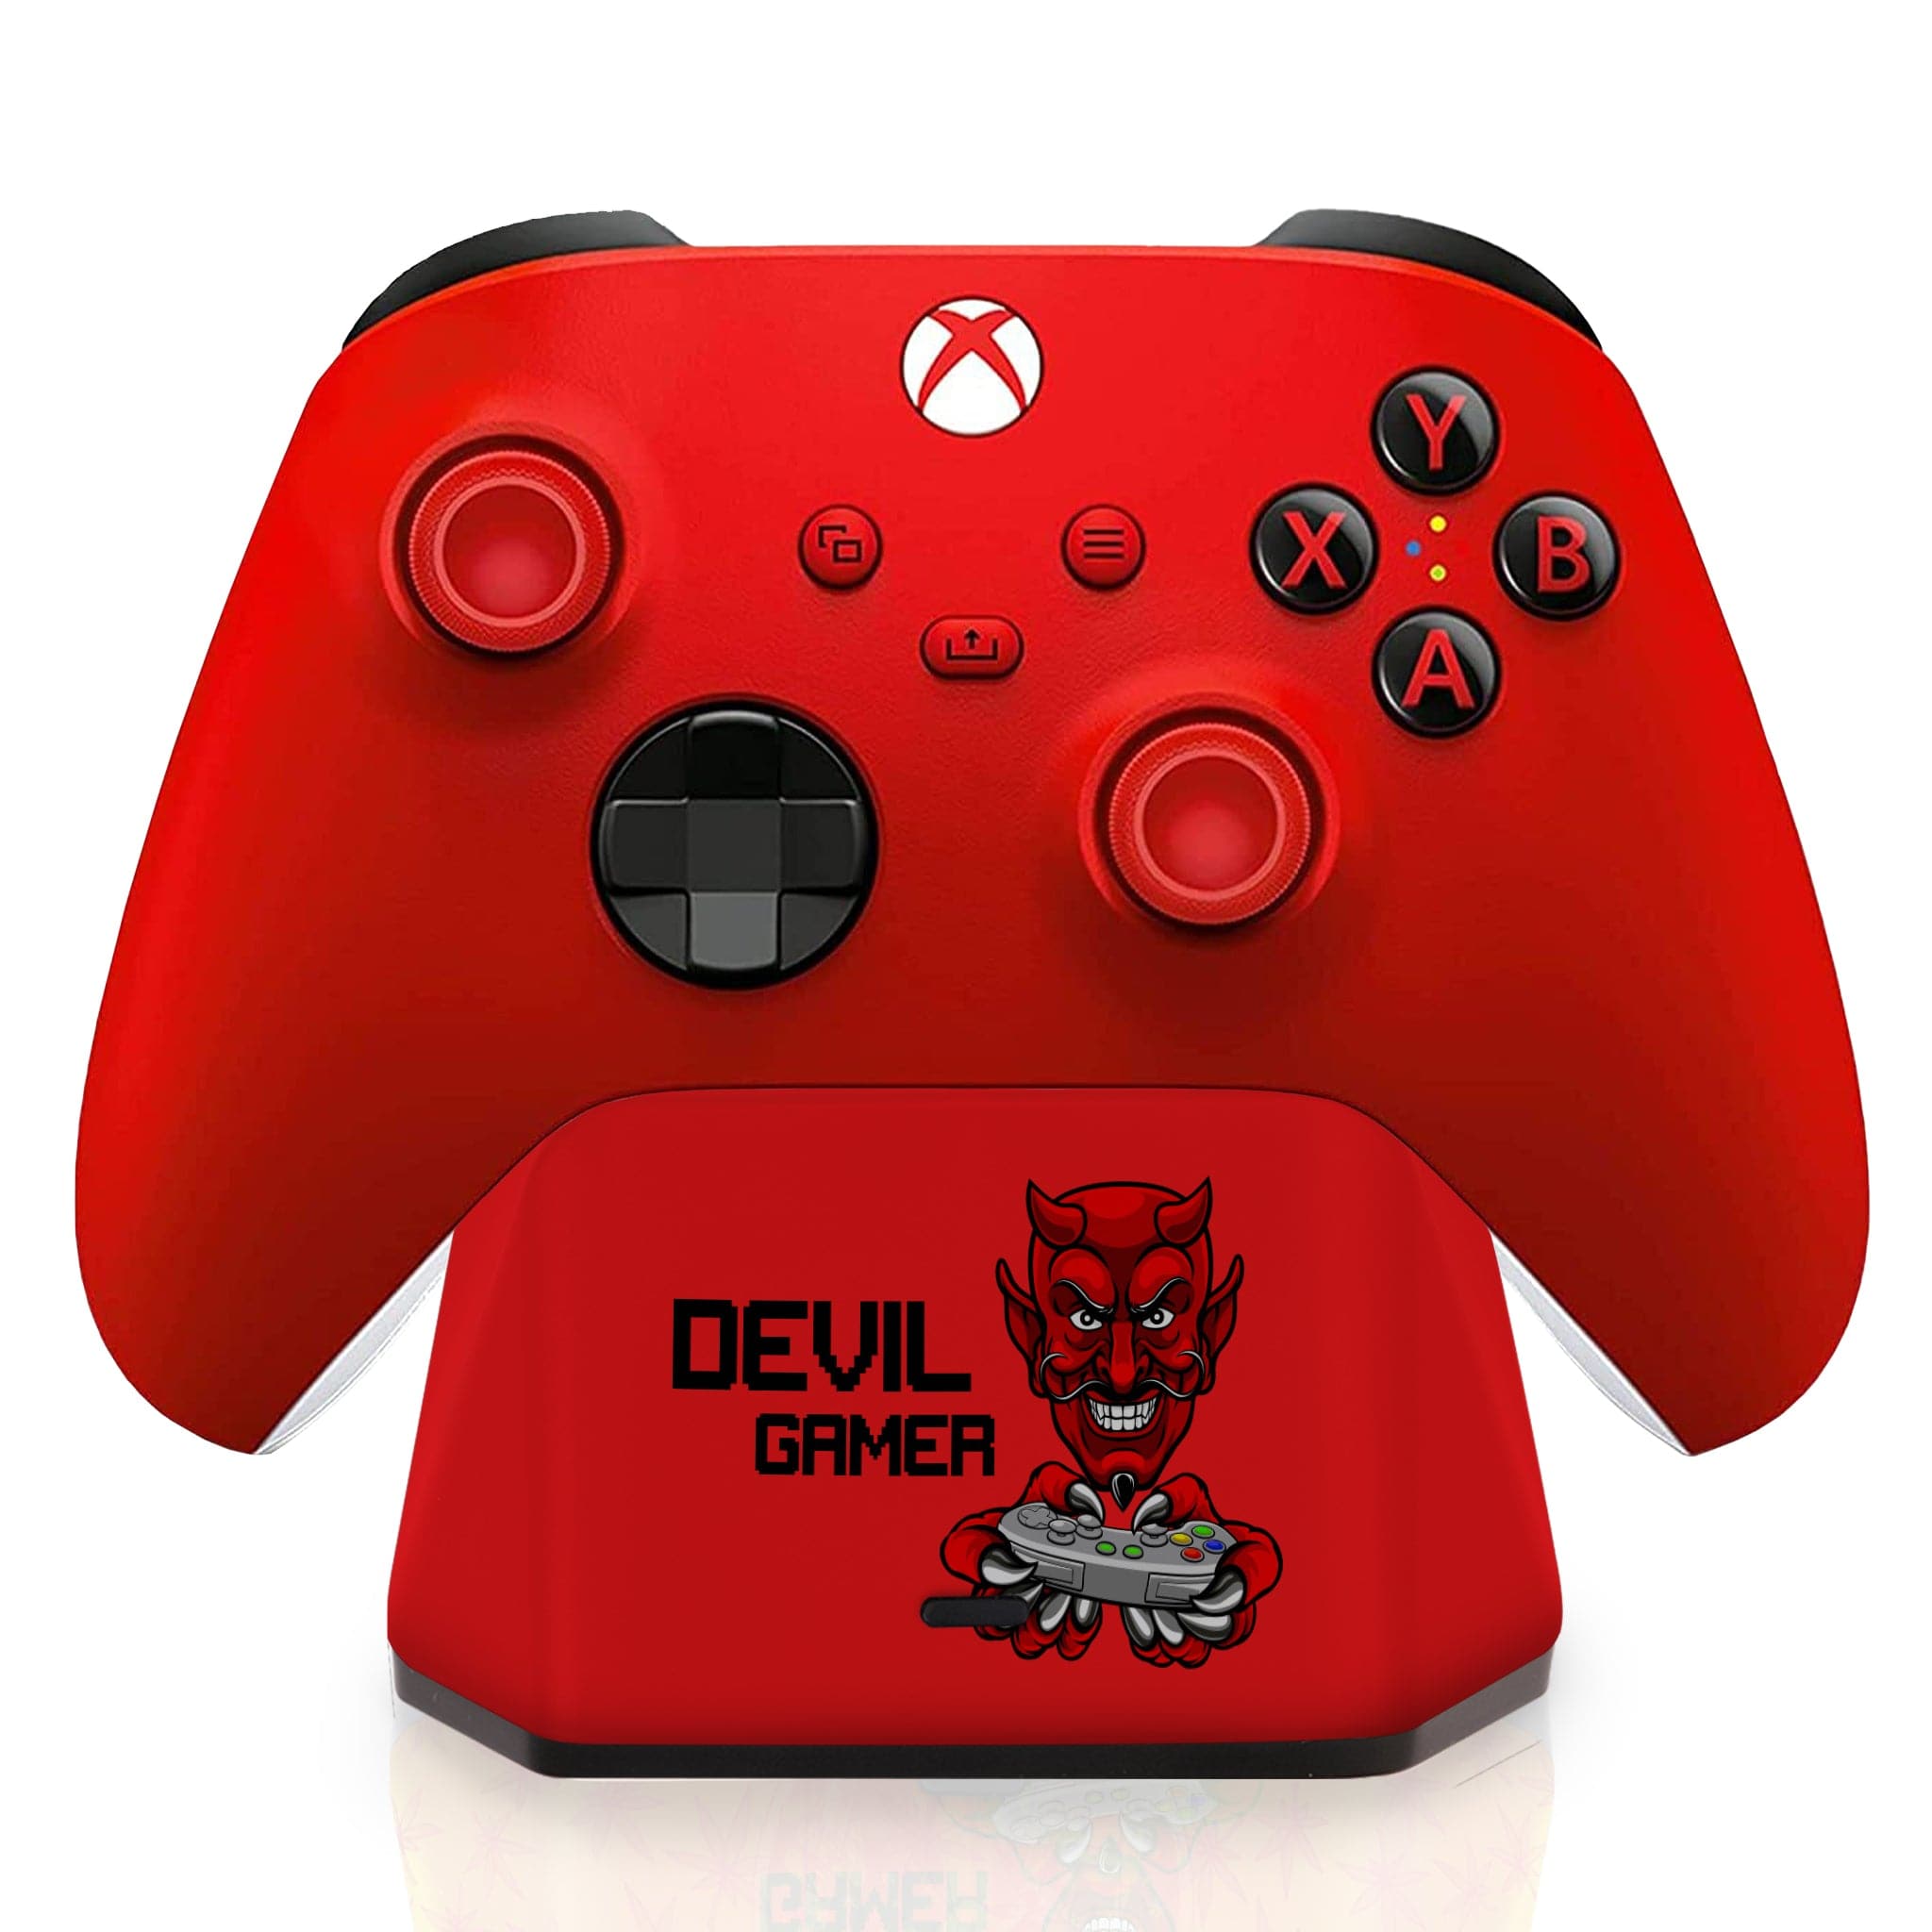 Devil Gamer Xbox Series X Controller with Charging Station